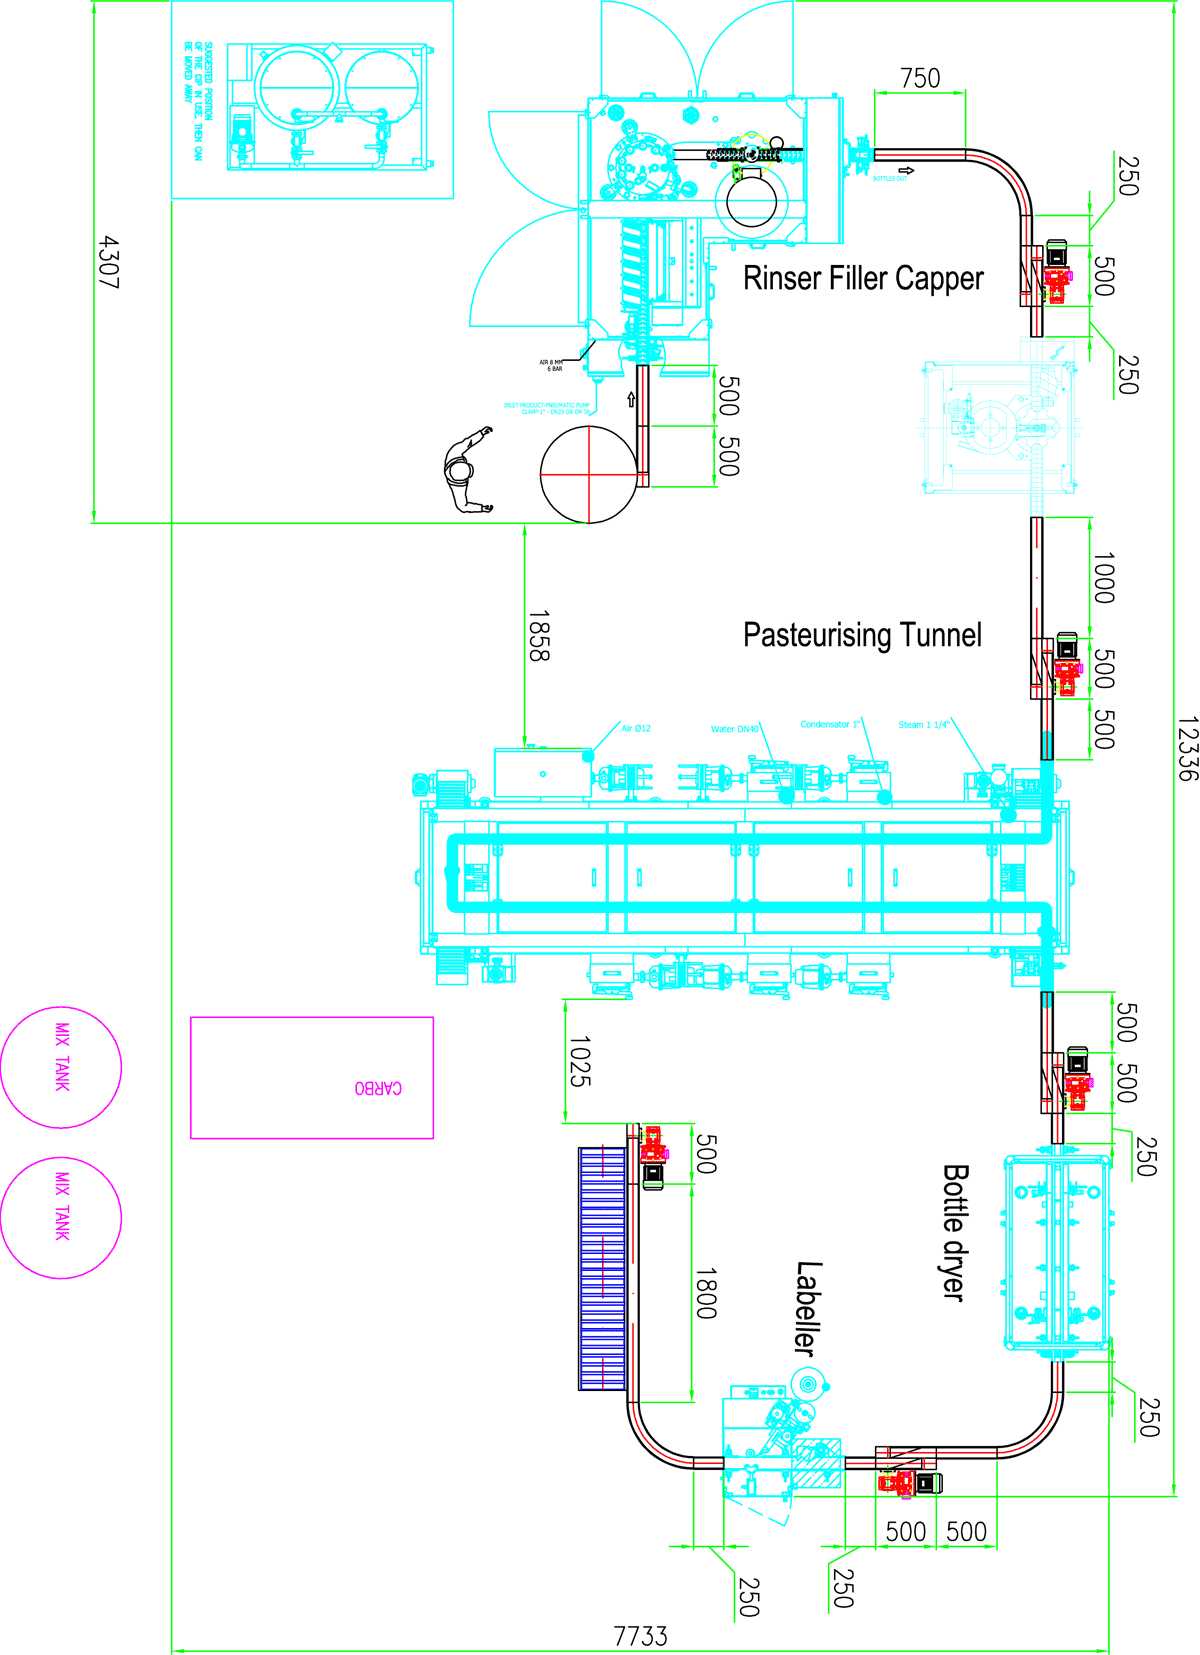 Scheme of the BCFL-1500 bottling line with the tunnel pasteurizer